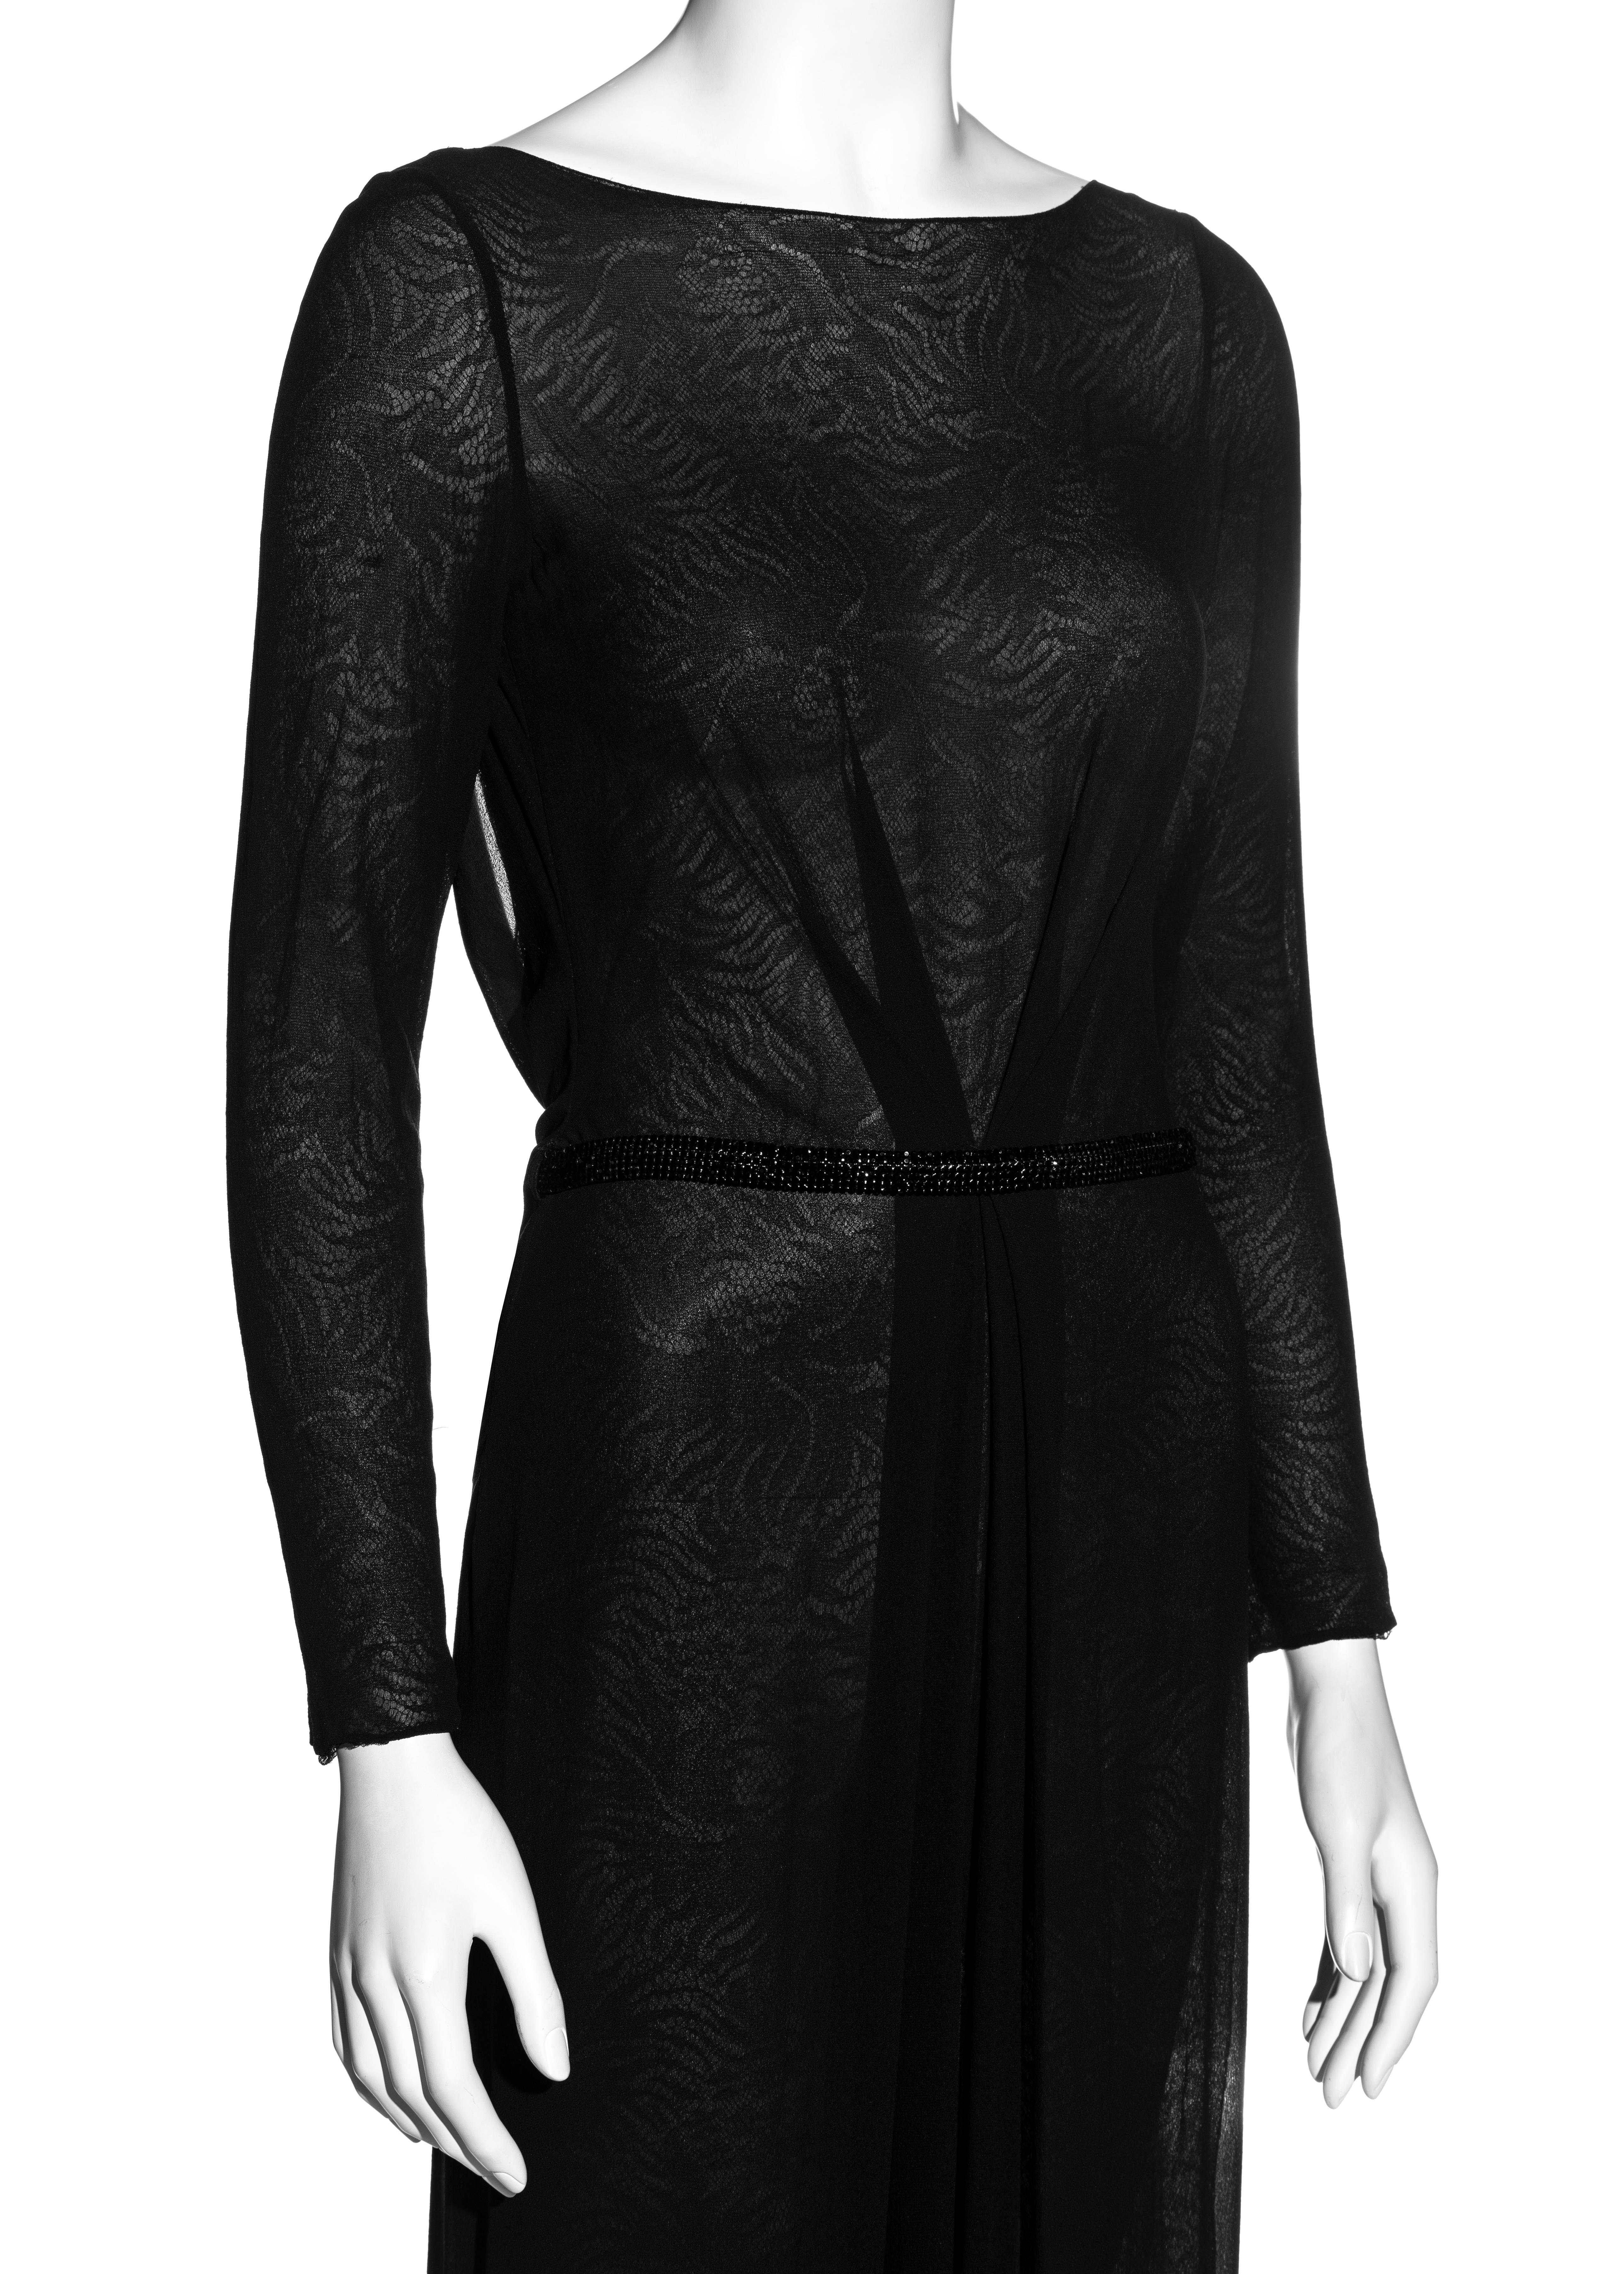 Black Gianni Versace black silk evening wrap dress with lace underlay, fw 2000 For Sale